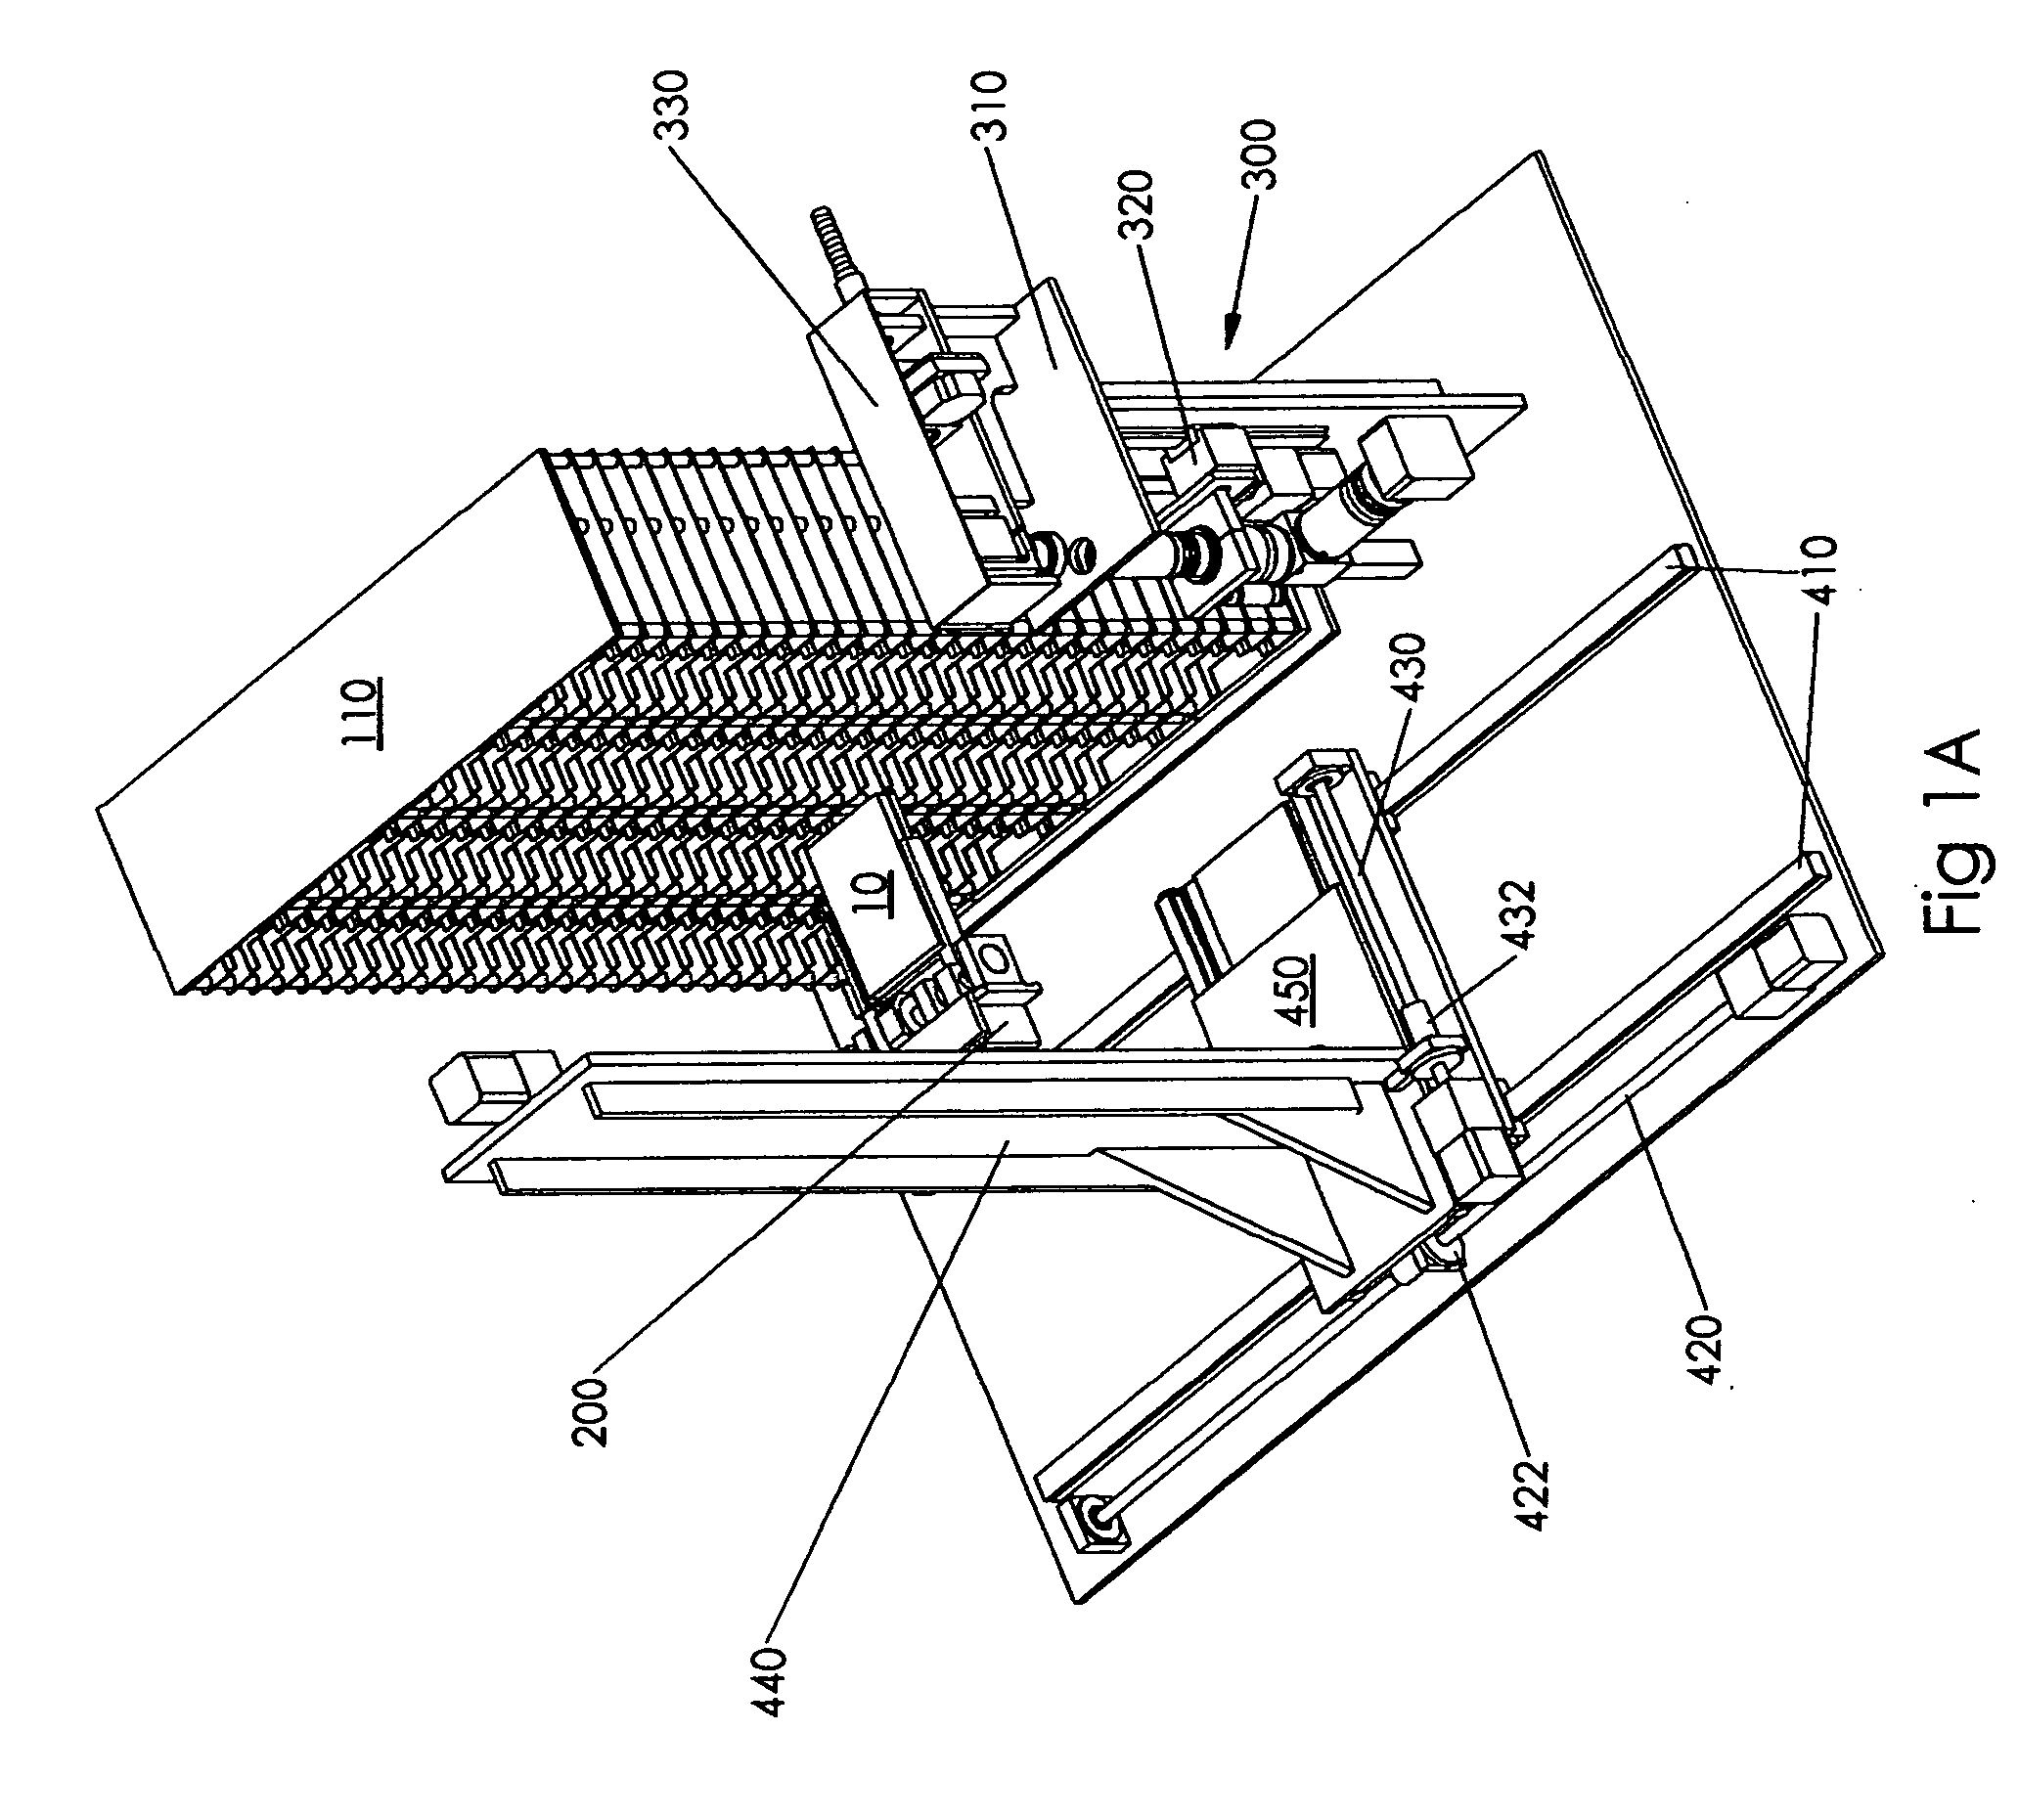 Parallel gripper for handling multiwell plate.